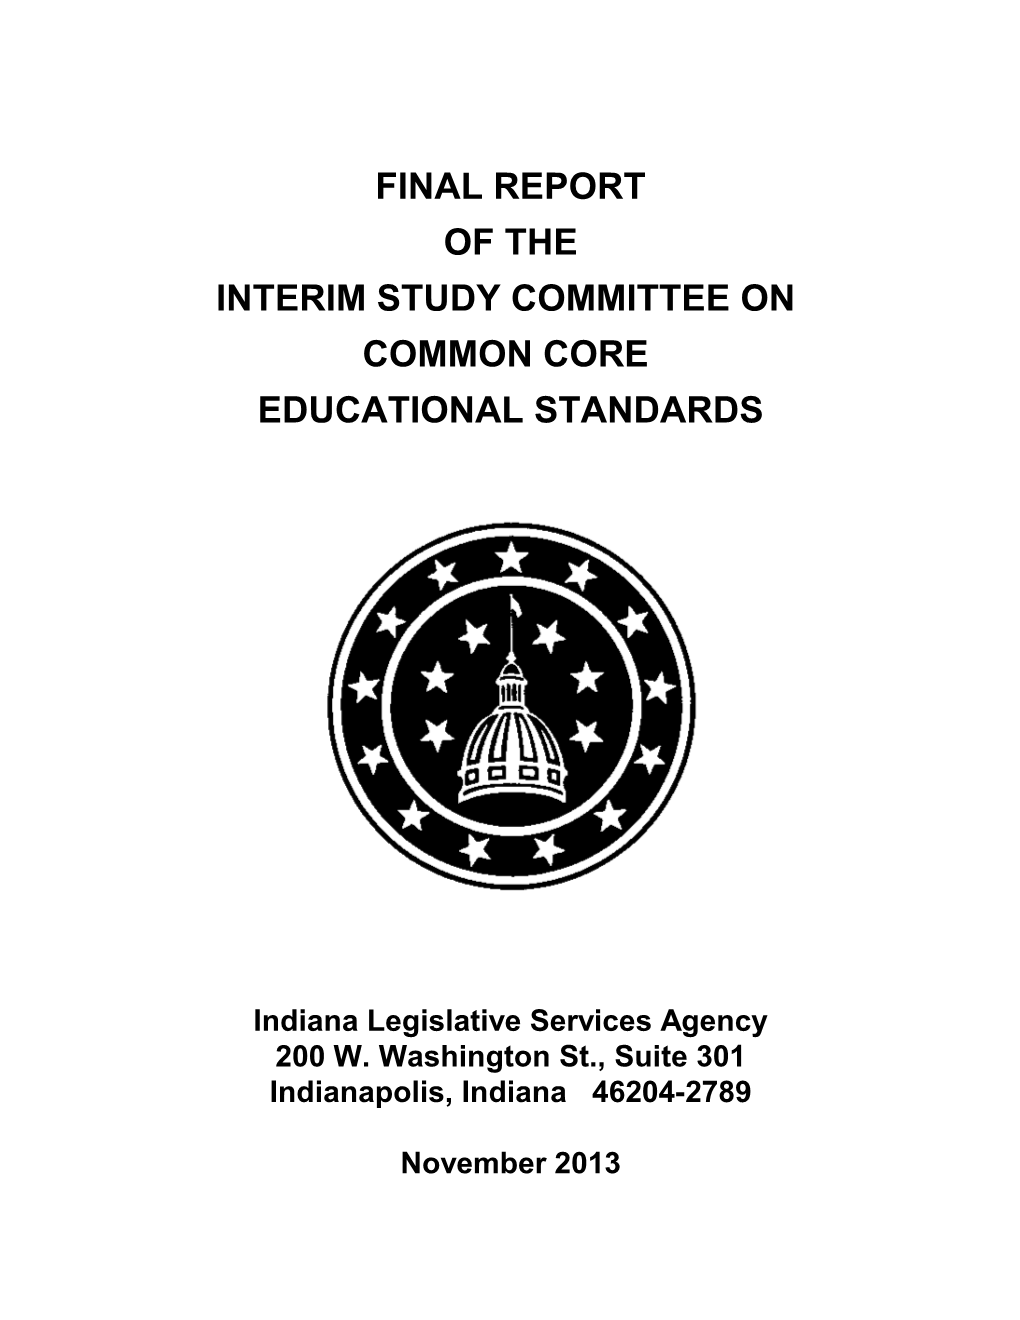 Final Report of the Interim Study Committee on Common Core Educational Standards